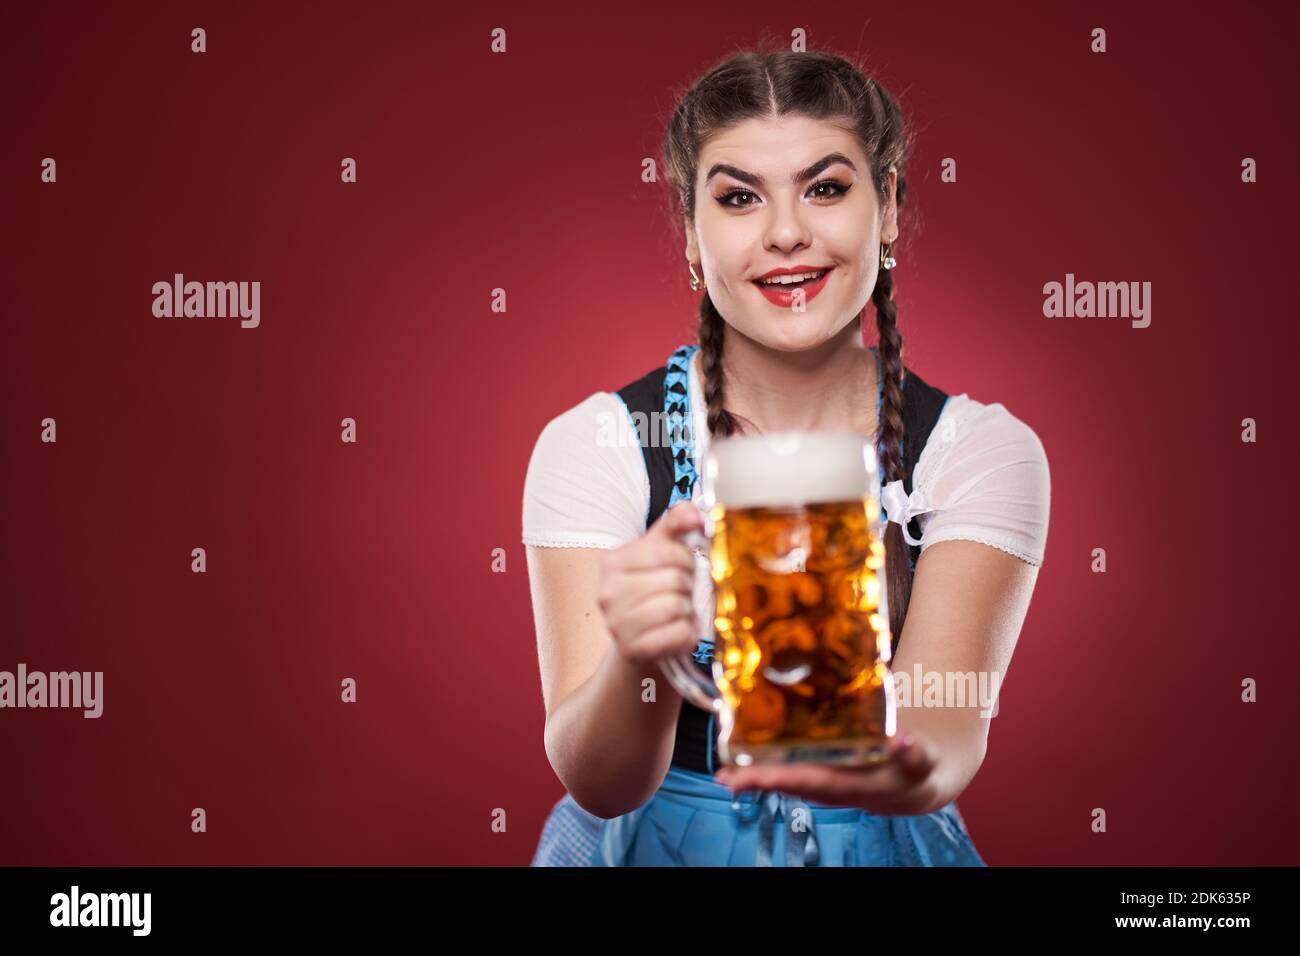 https://c8.alamy.com/comp/2DK635P/young-woman-in-traditional-german-costume-holding-a-pint-of-pale-lager-2DK635P.jpg